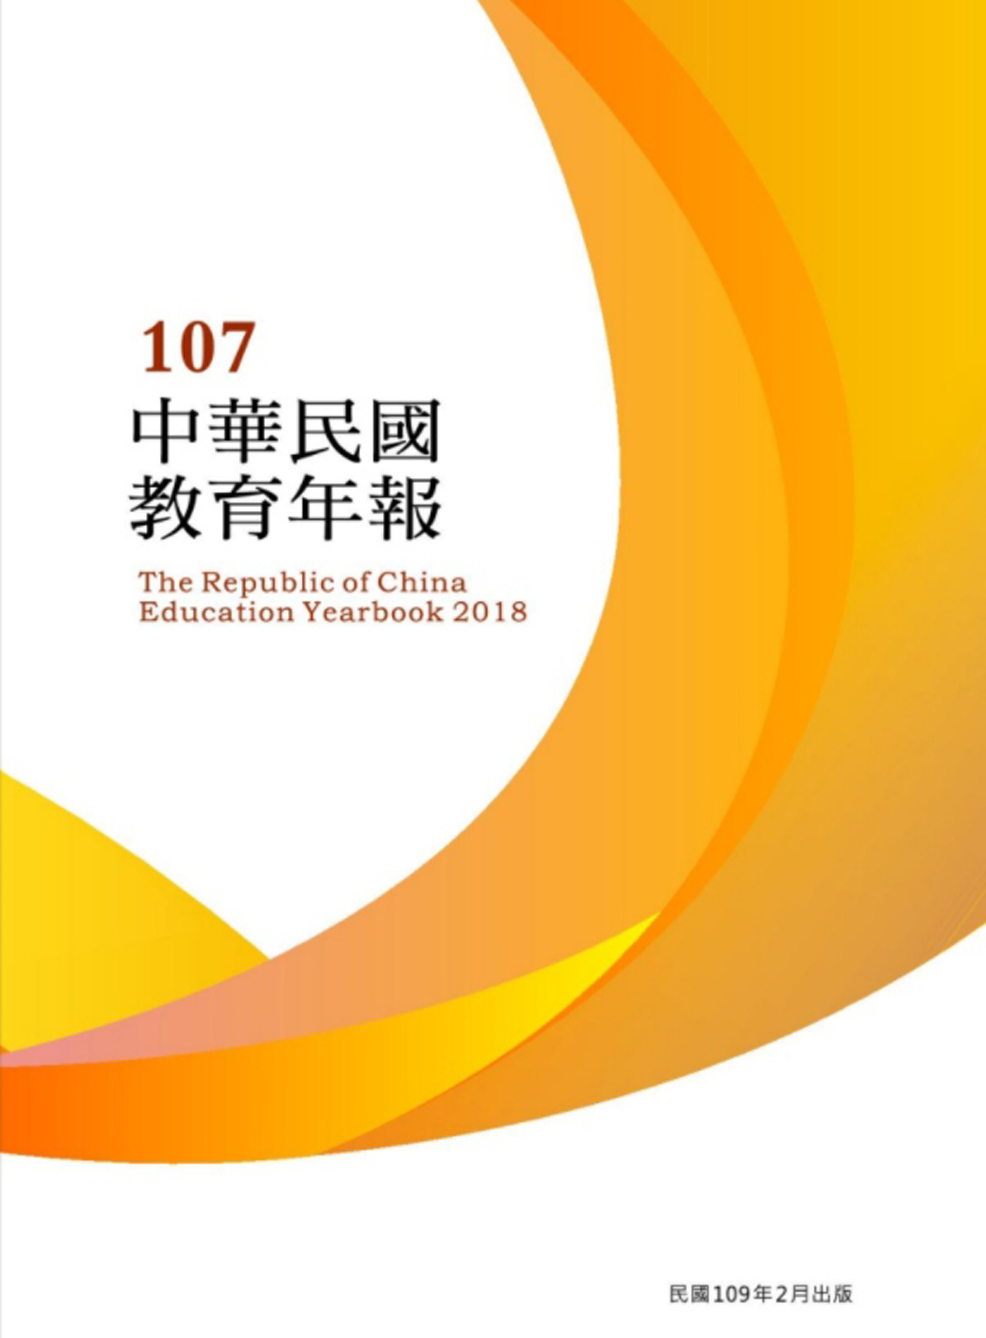 The Republic of China Education Yearbook 2018